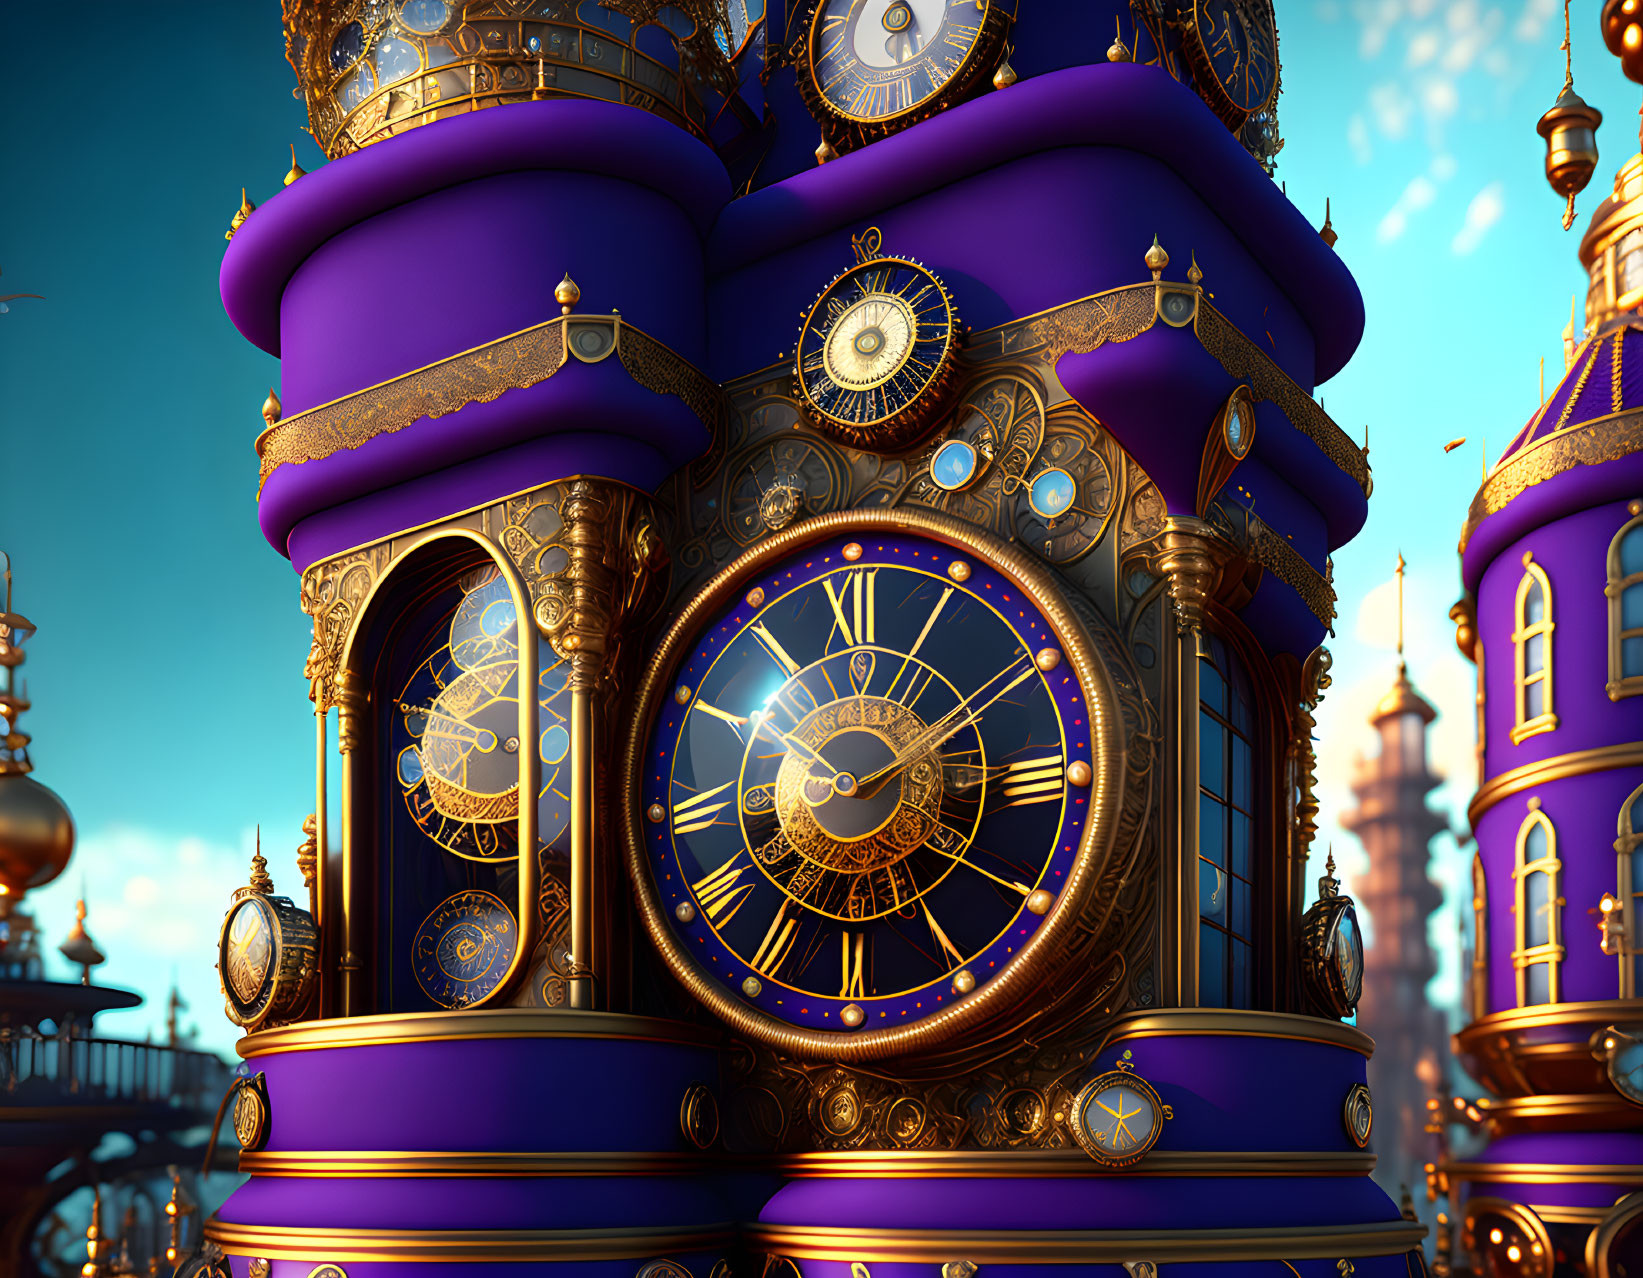 Fantasy Clock Tower with Golden Details and Purple Roofs